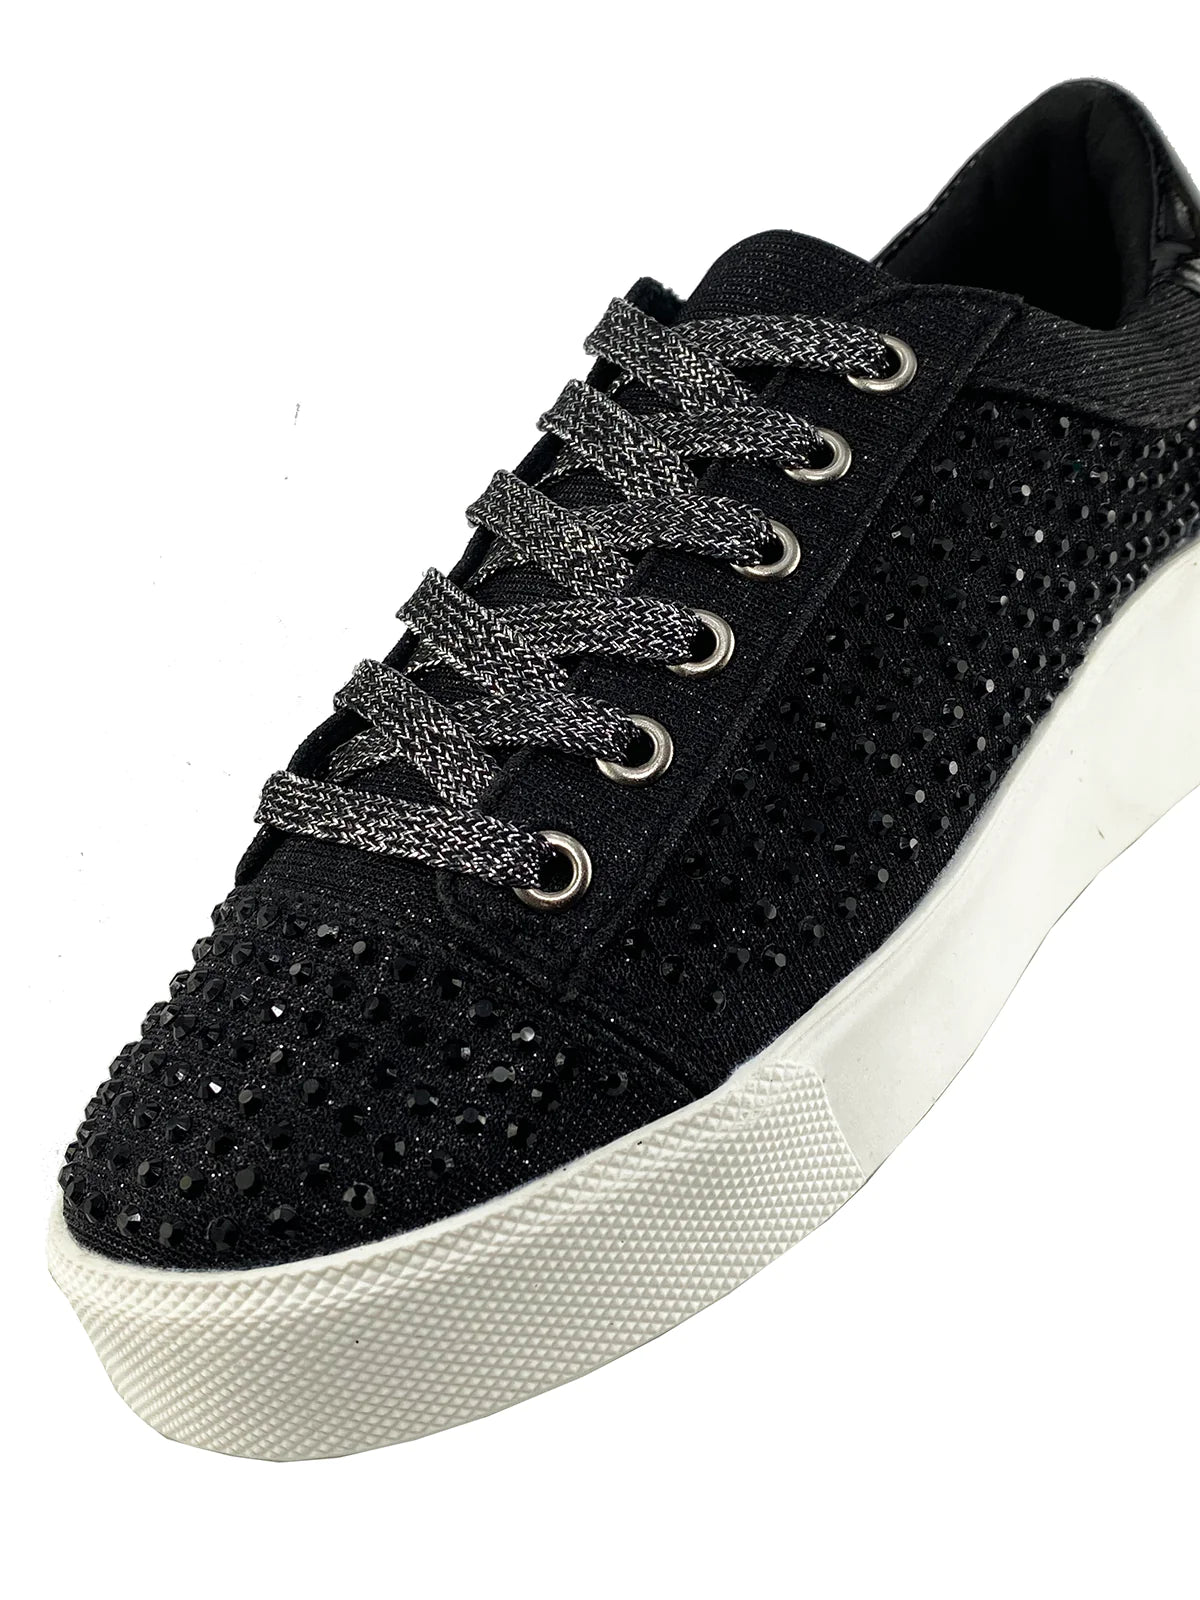 Not Rated Diva Sparkle Sneakers in Black at ooh la la! in Grapevine TX 76051